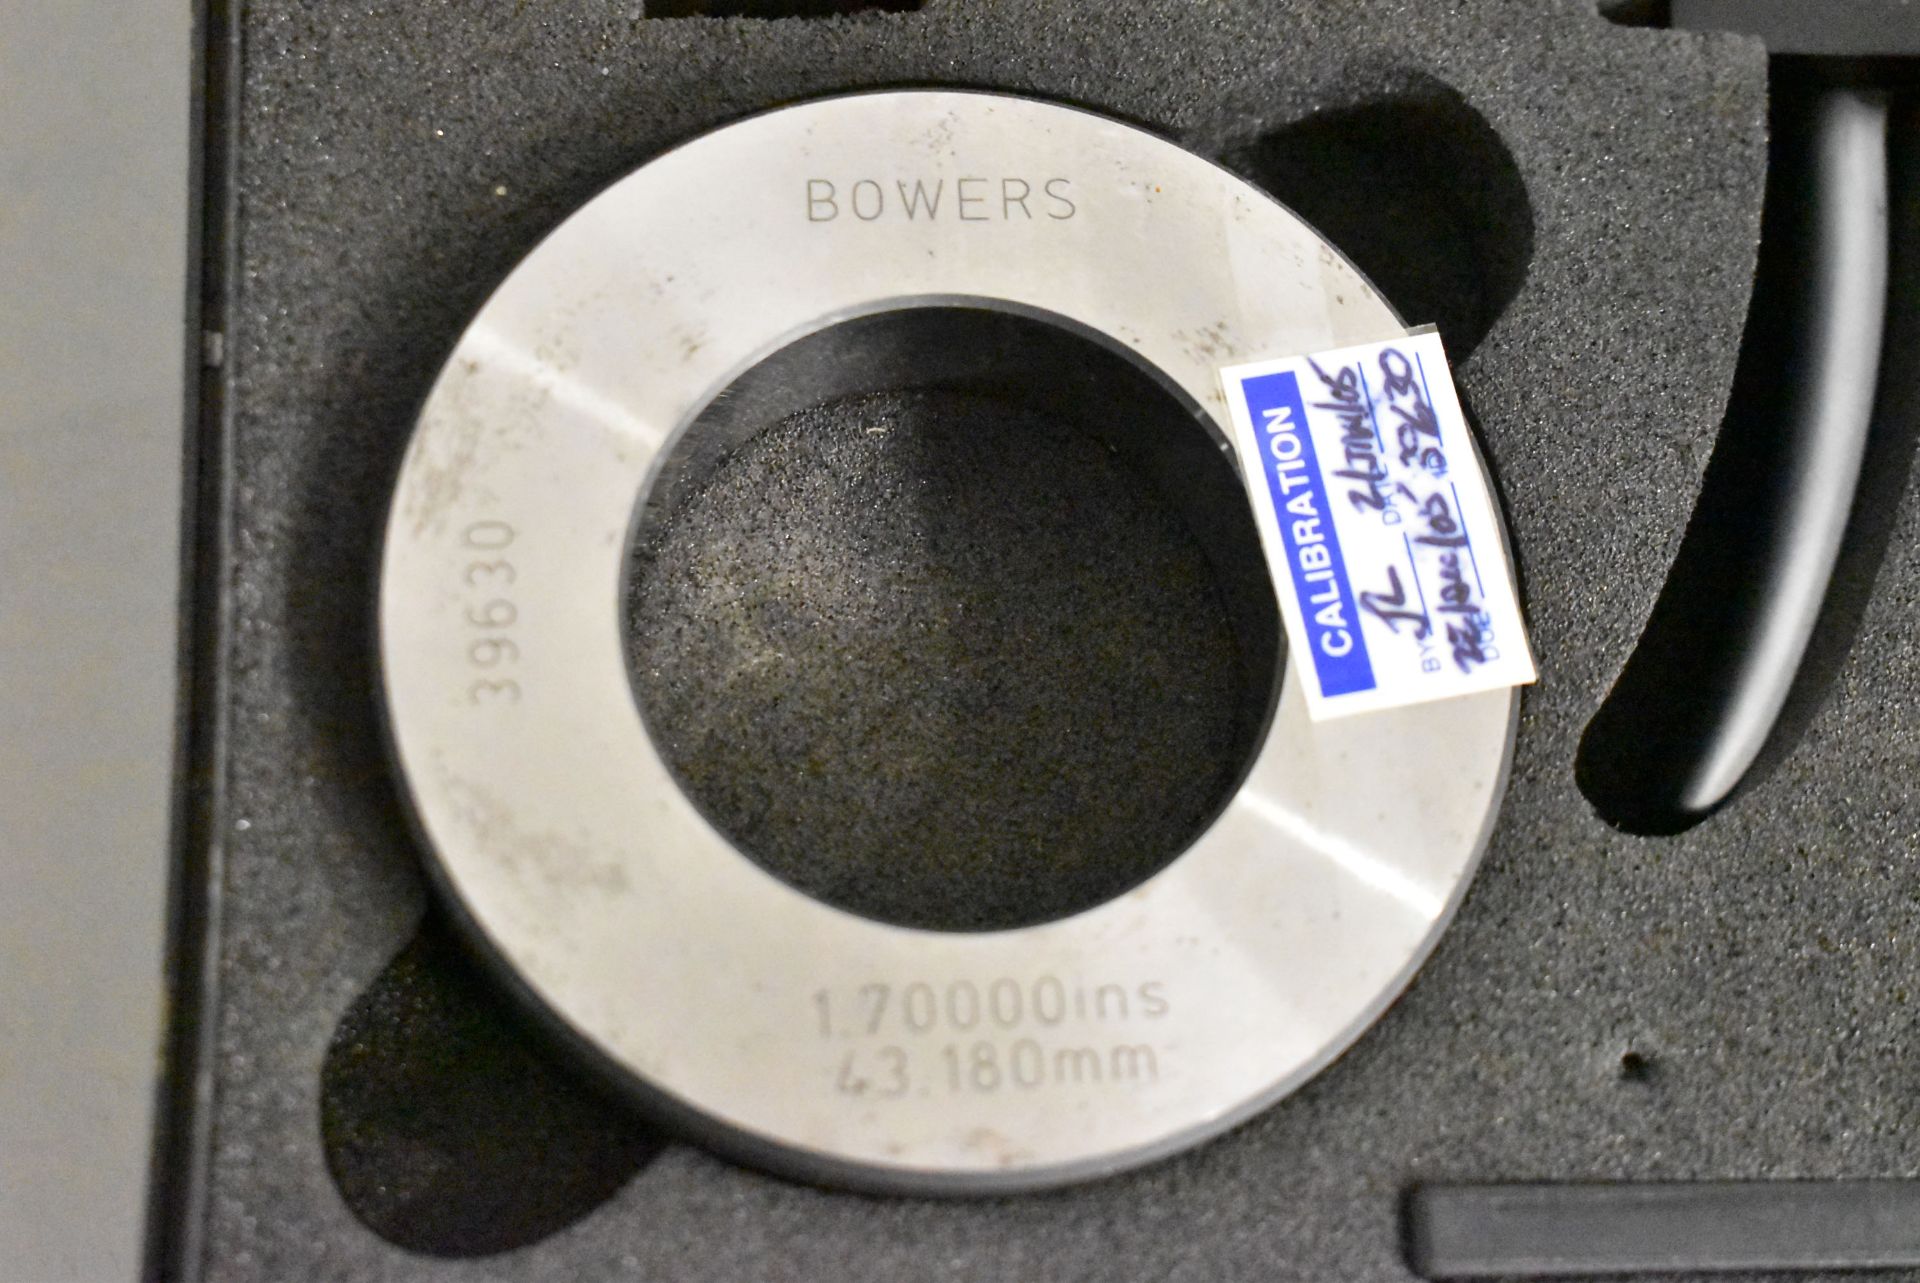 FOWLERS BS HOLEMATIC 1 3/8" TO 2" DIGITAL BORE GAUGE - Image 3 of 3